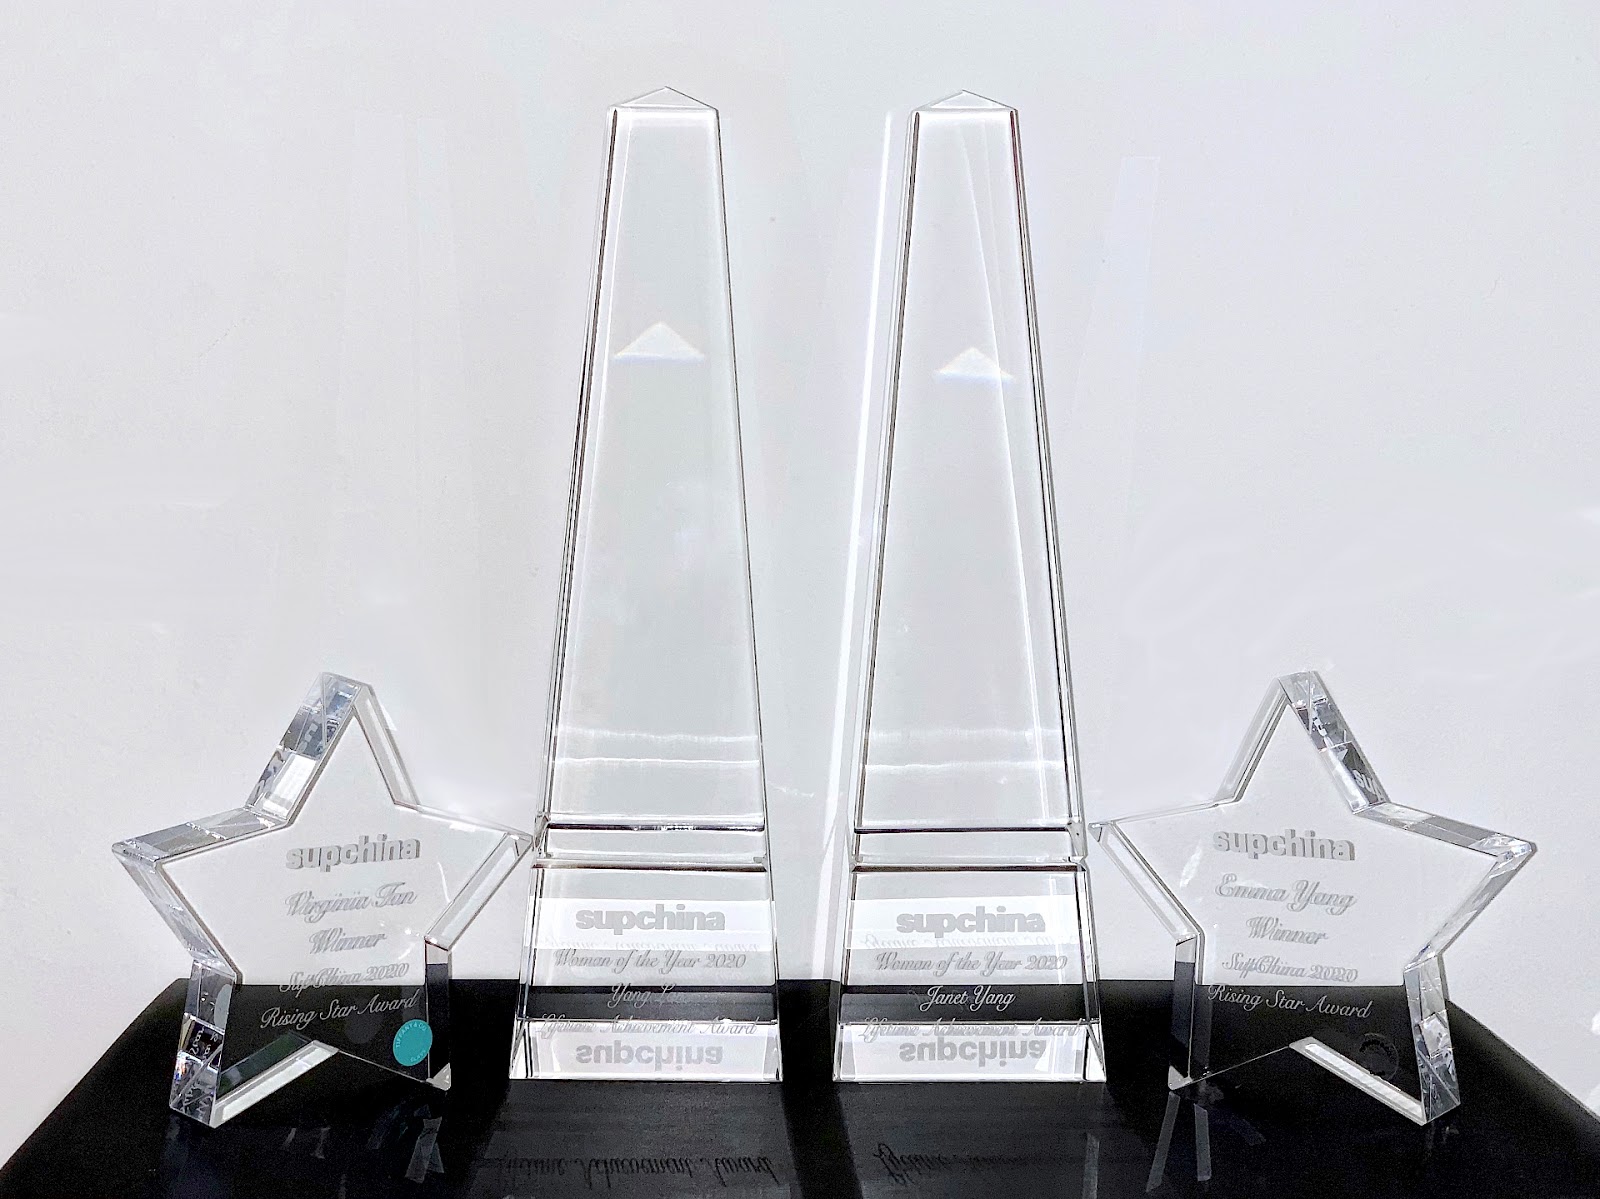 the The China Project next gen rising star awards, and lifetime achievement awards, given out at the annual The China Project Women's Conference